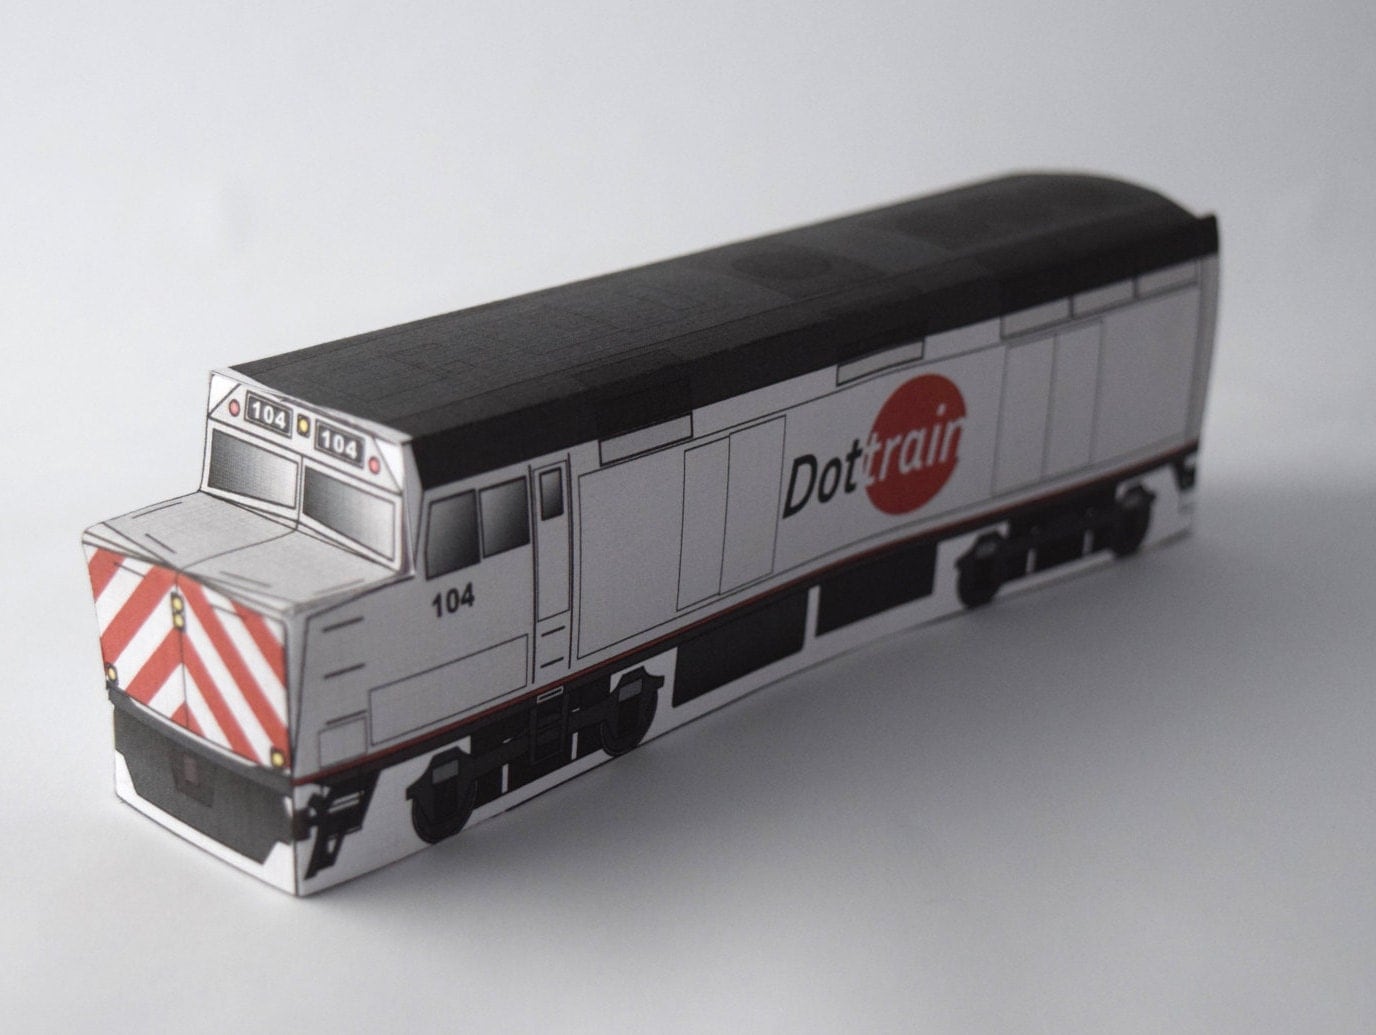 do-it-yourself-paper-train-template-3d-papercraft-model-craft-activity